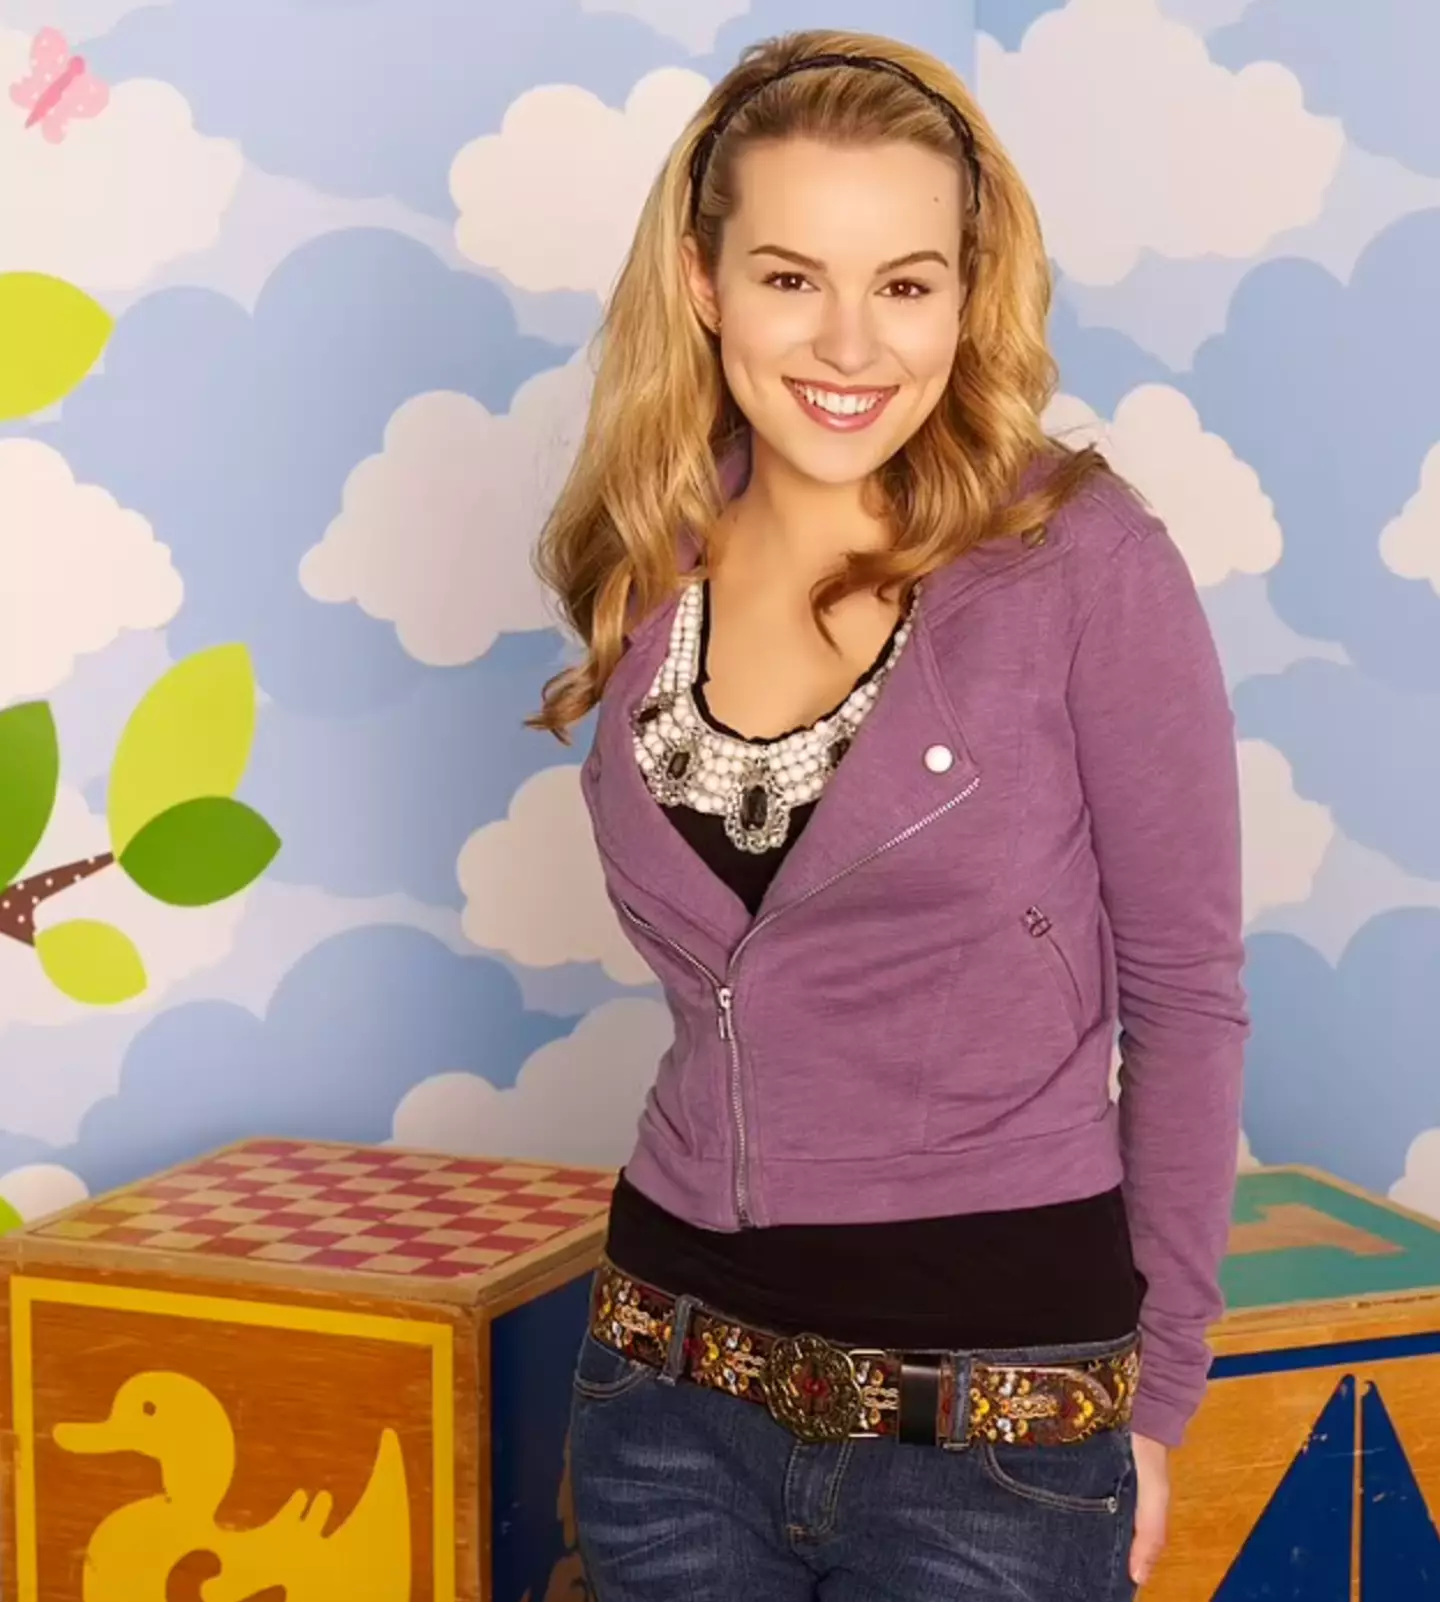 Bridgit Mendler has shared the exciting news that she's adopted a four-year-old boy.